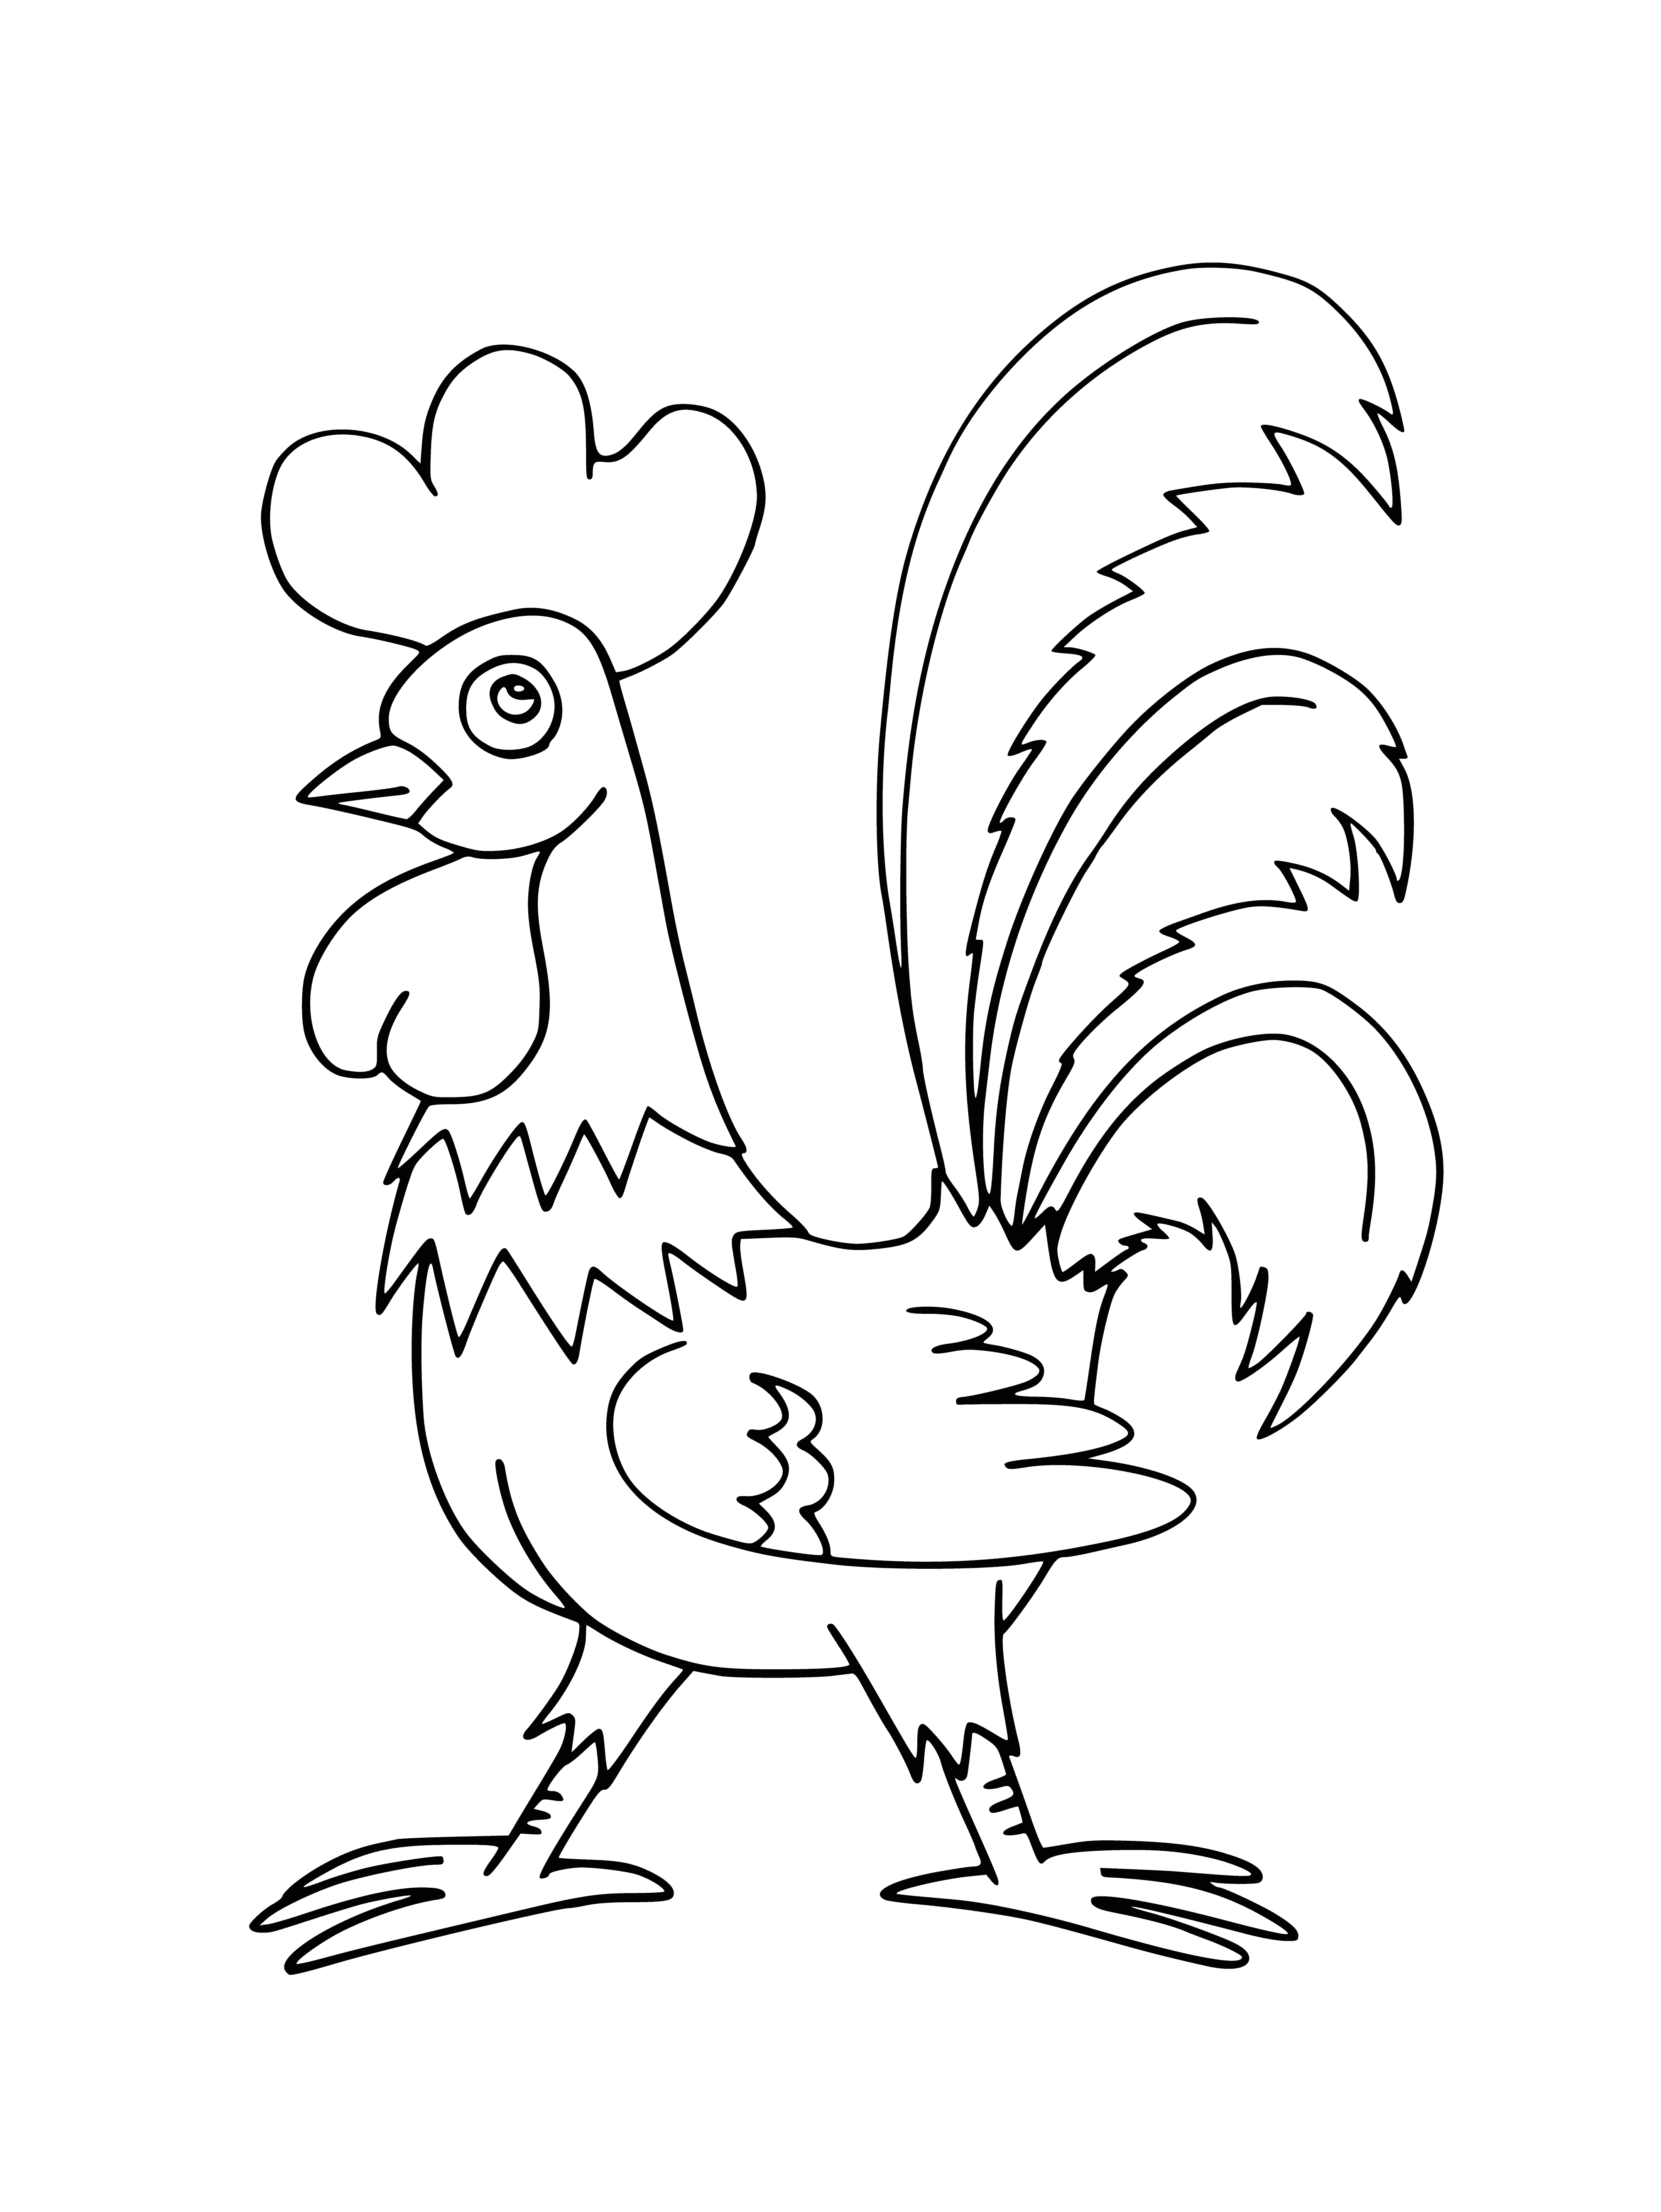 coloring page: A male chicken with a large comb, wattles & long, pointy tail feathers.